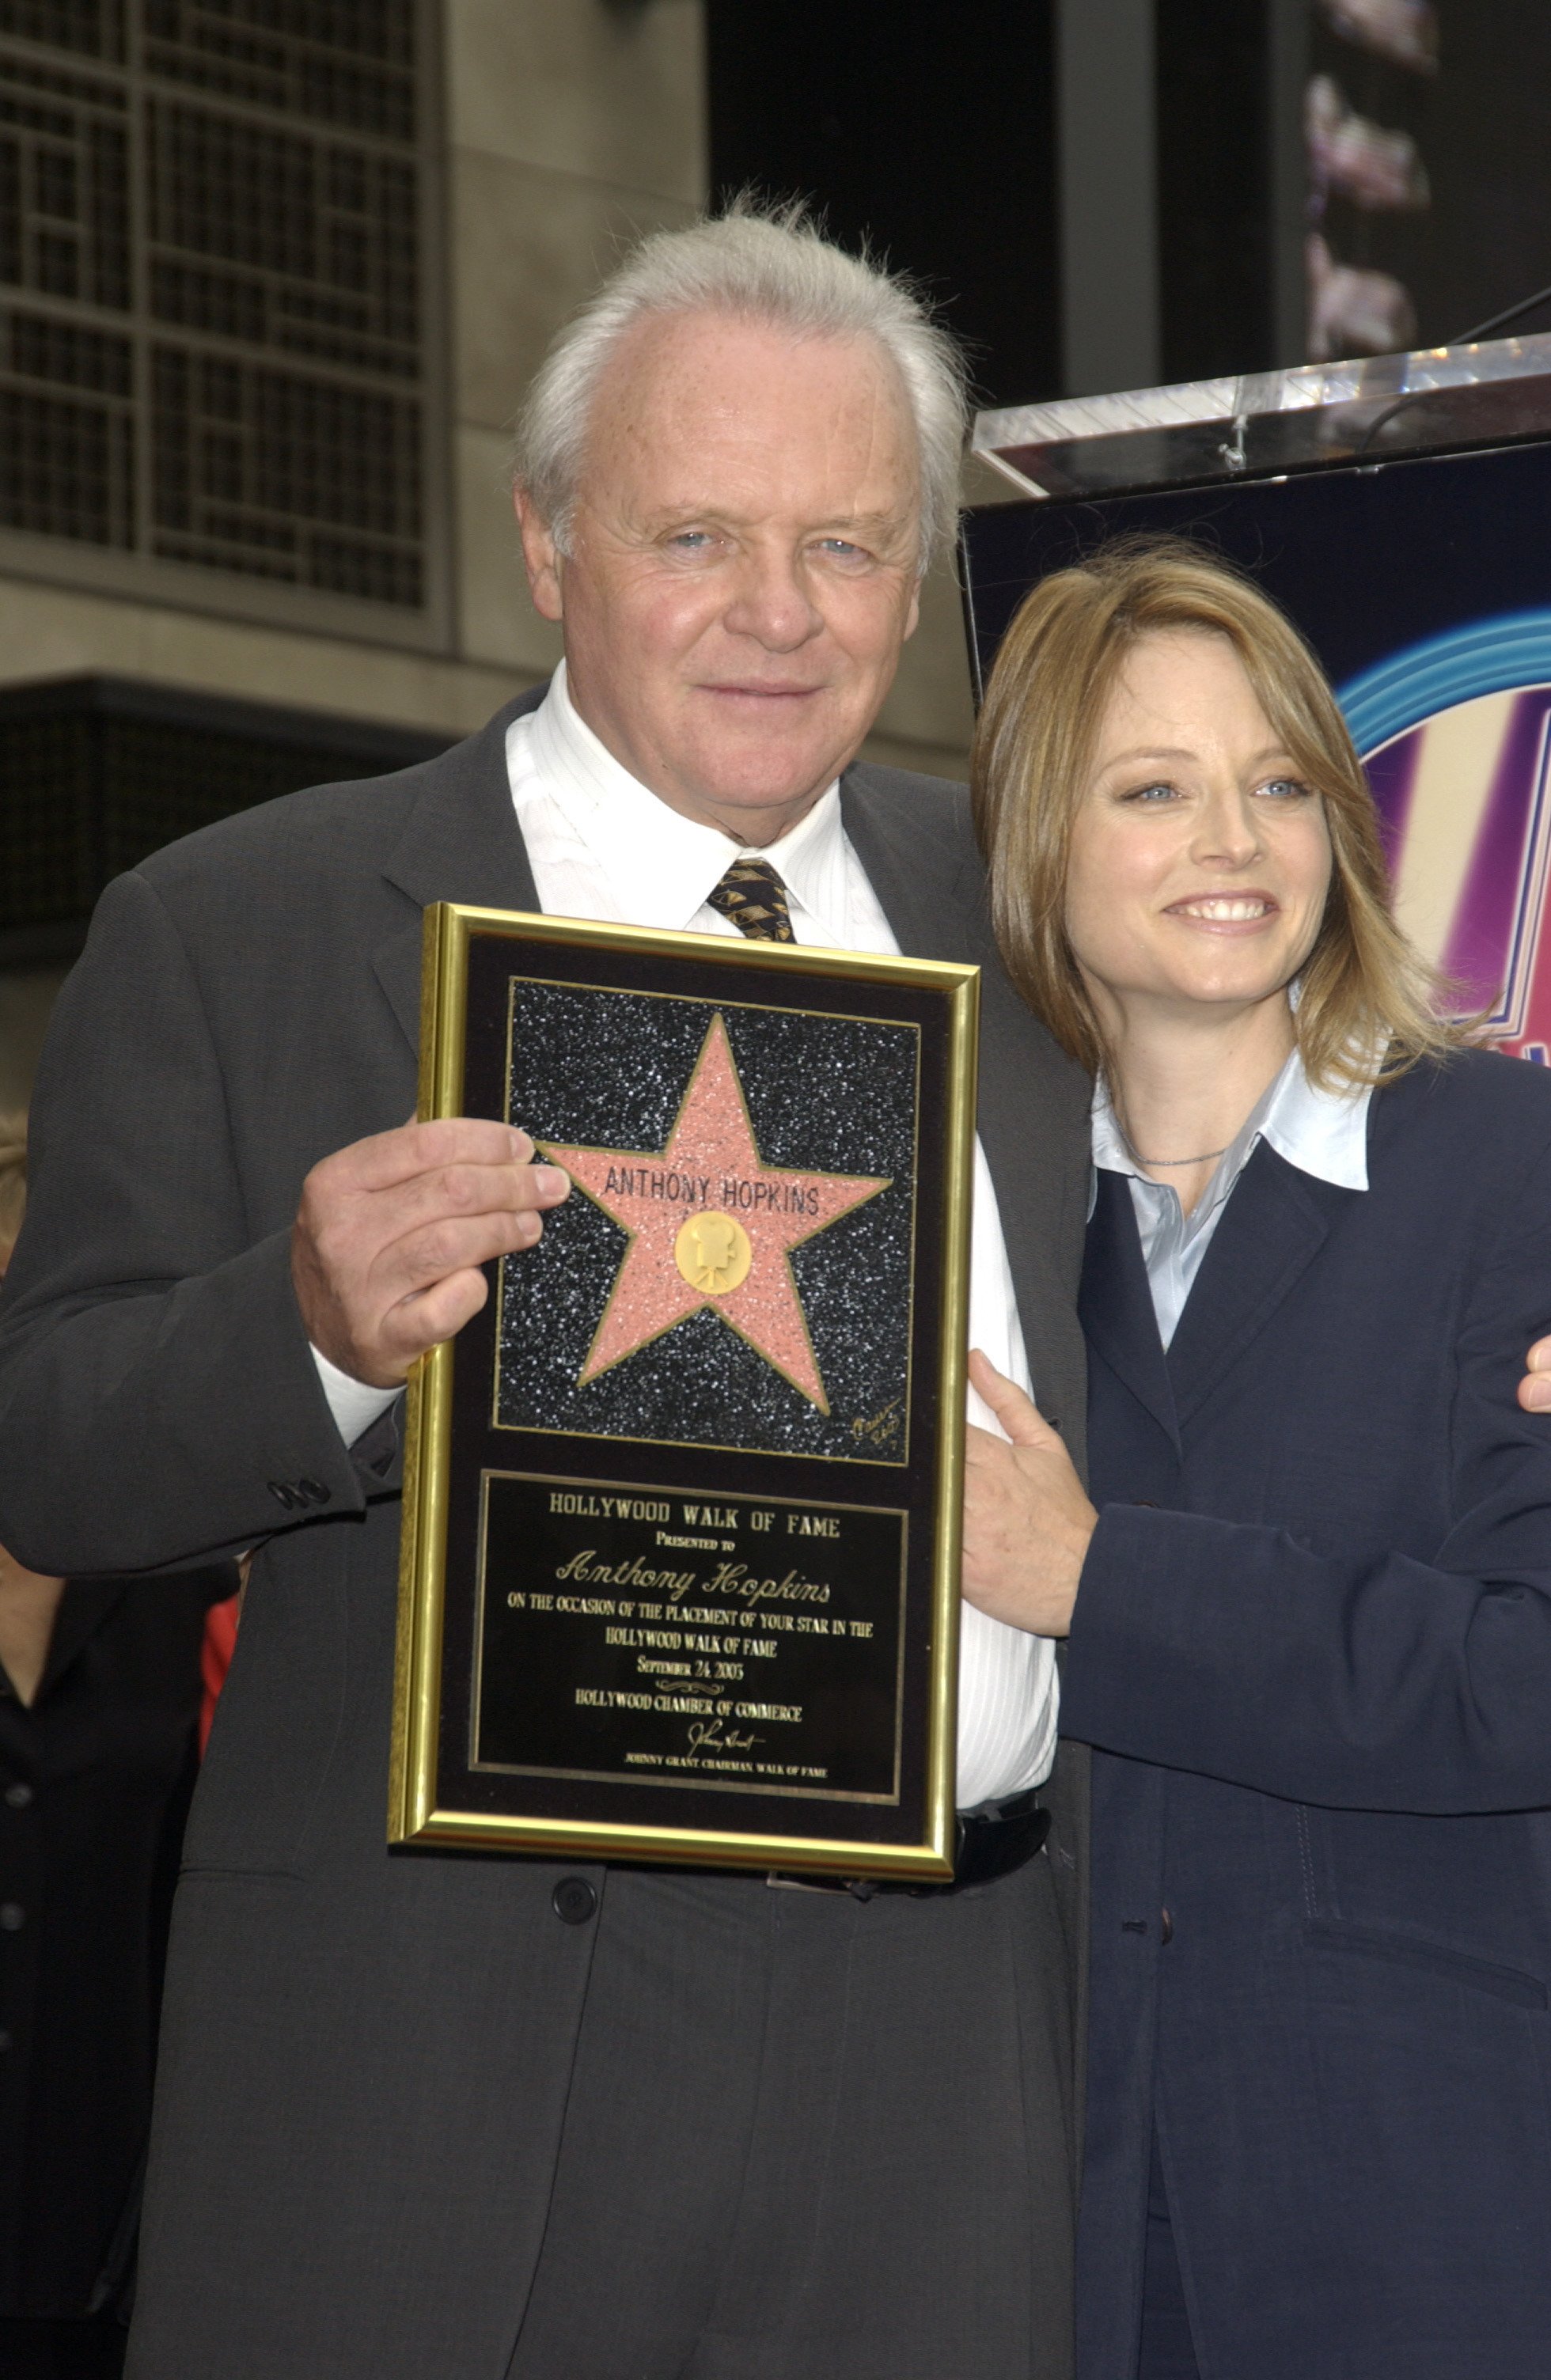 Sir Anthony Hopkins receiving his Hollywood Star honor, with actress, Jodie Hopkins on September, 2003. | Photo: Shutterstock.